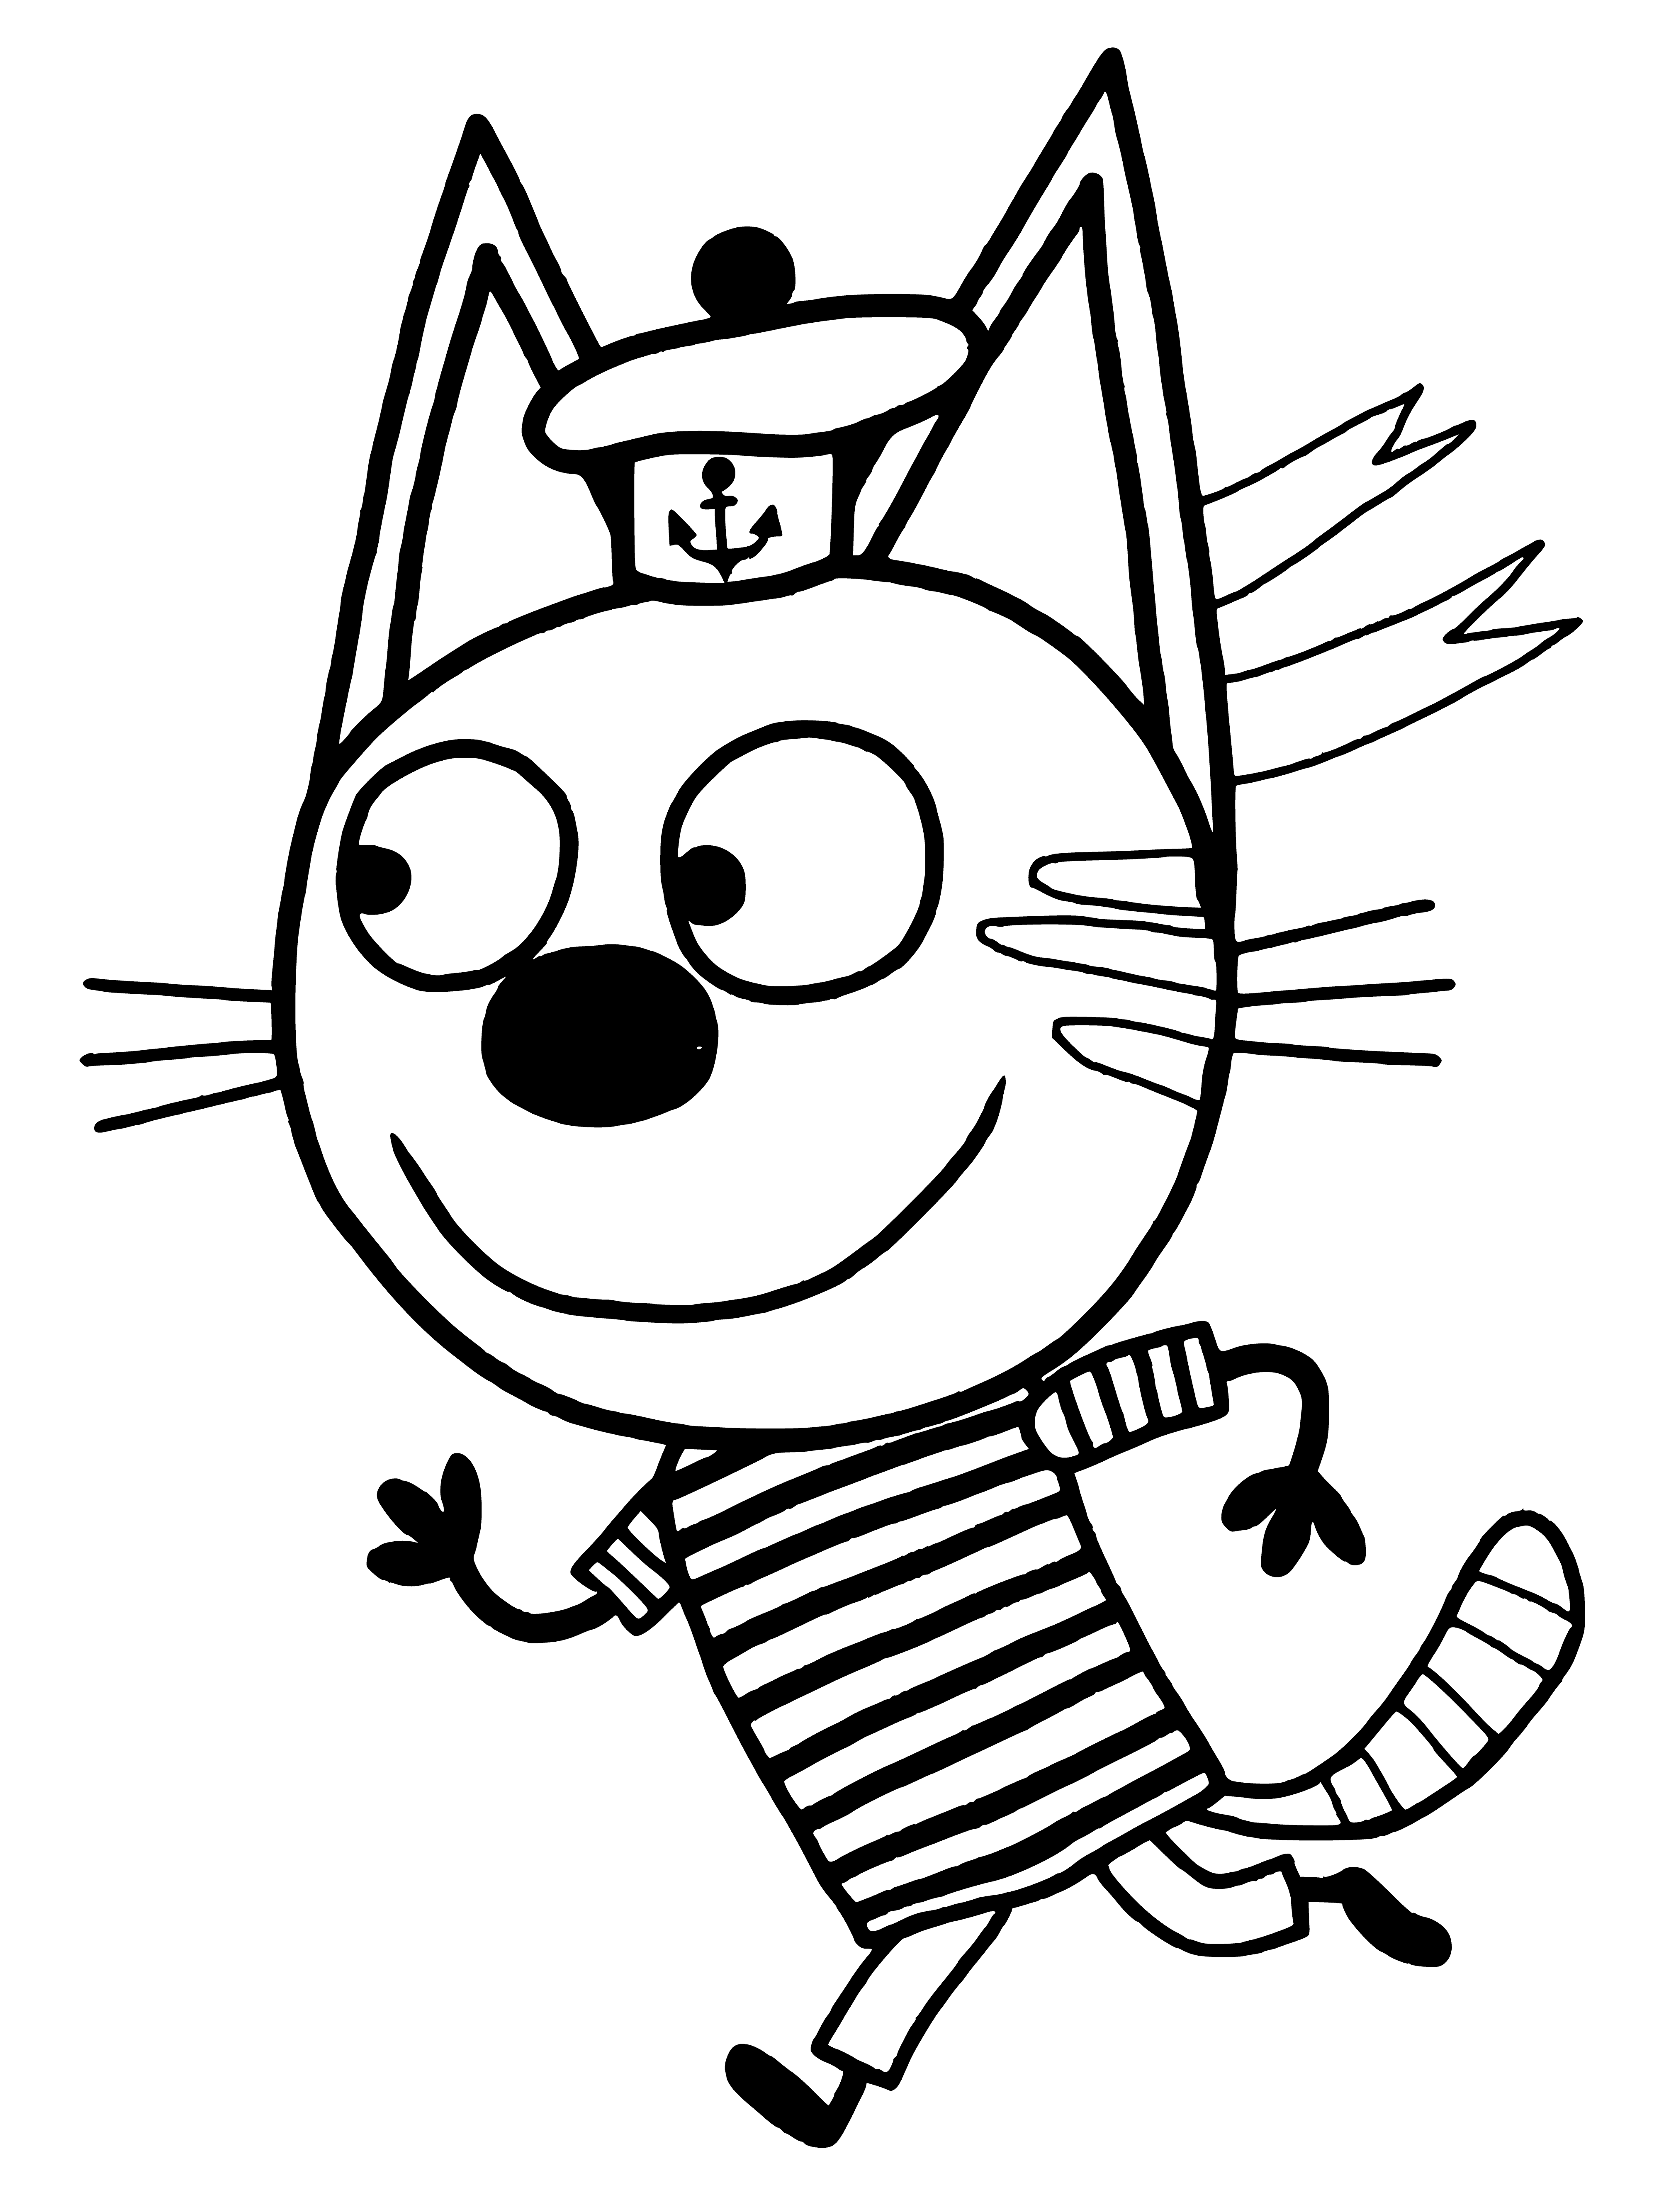 coloring page: 3 cats-- pale orange, dark orange & gray-- all lie or sit with open mouths in a coloring page.